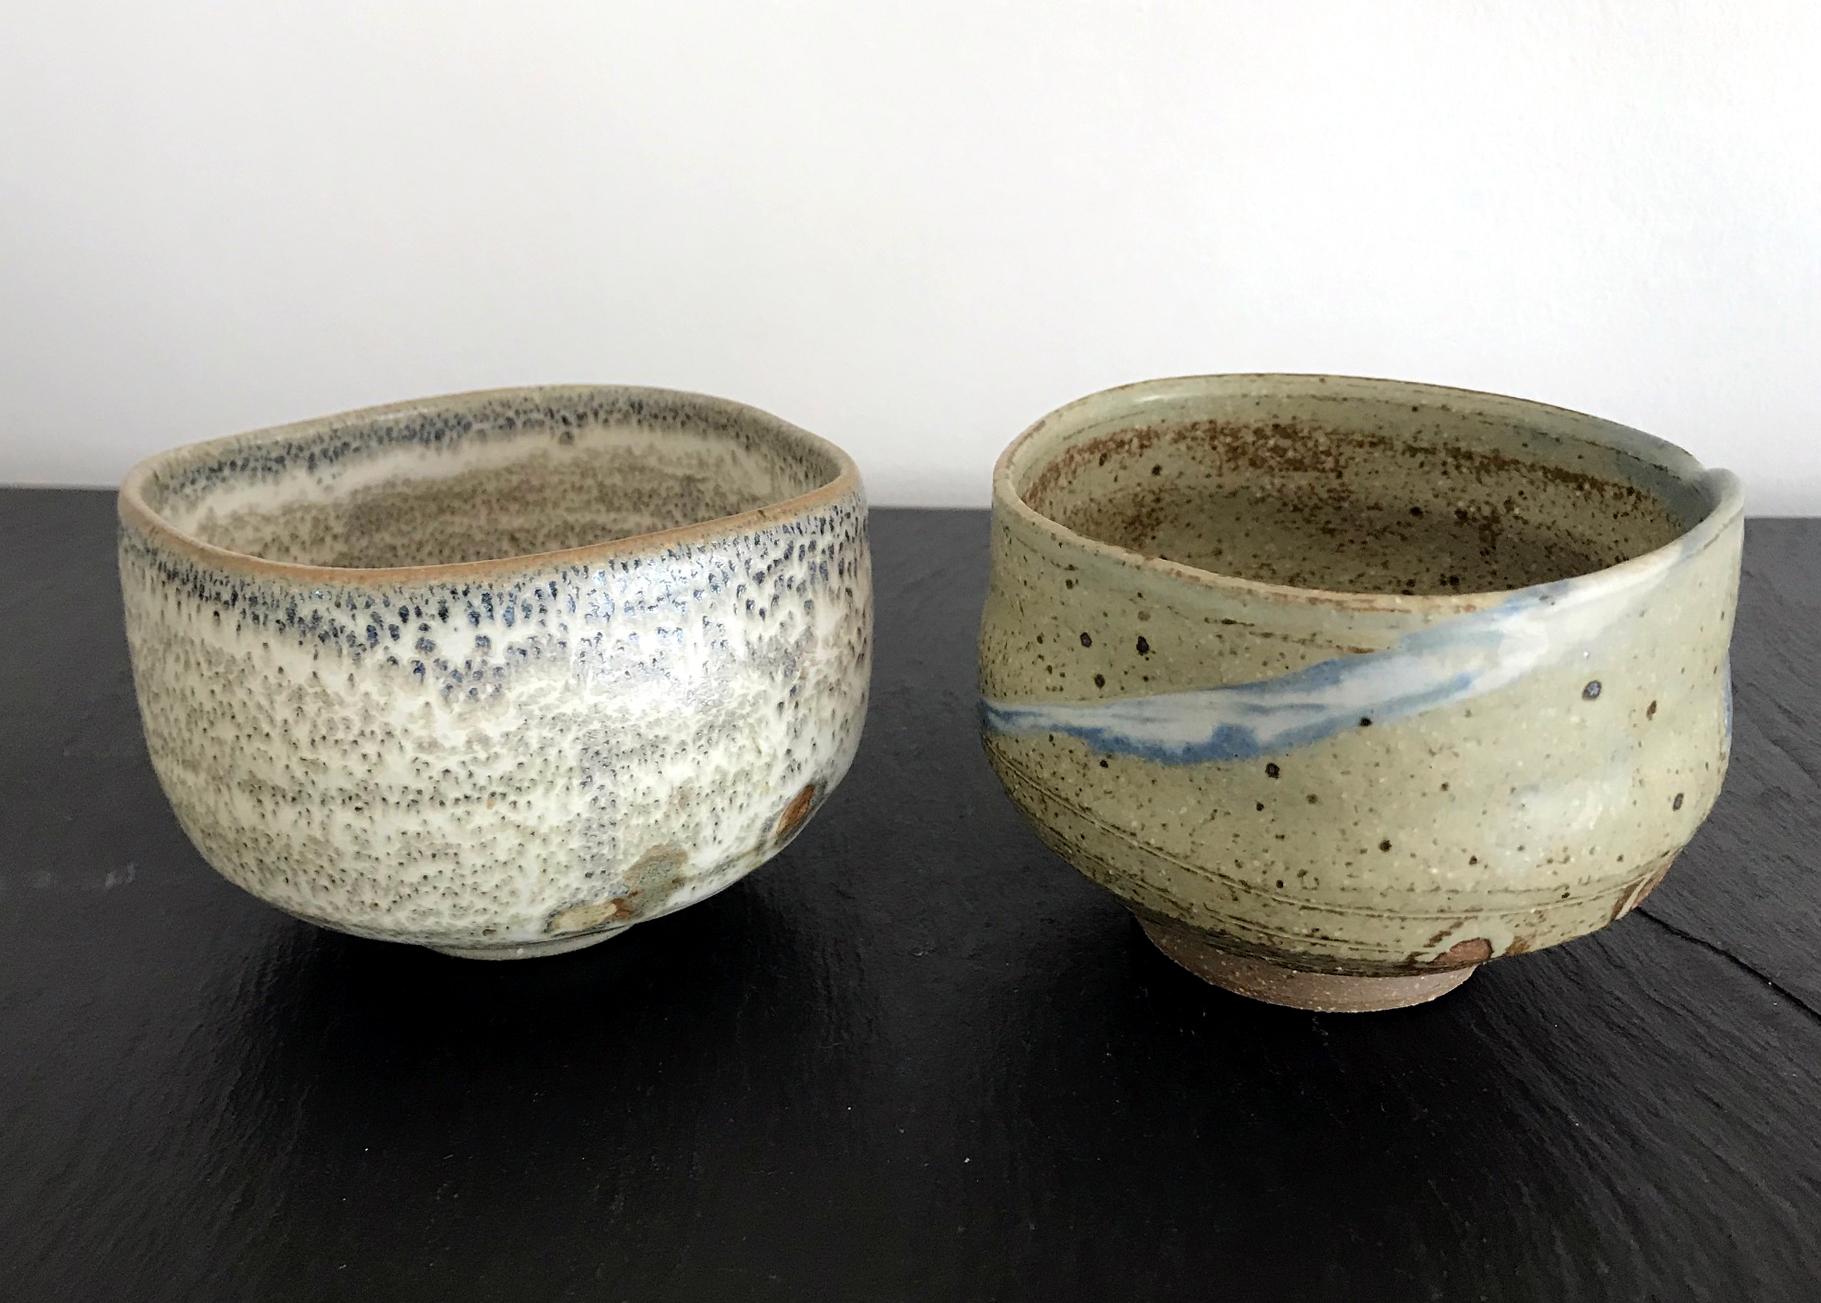 Made by Japanese ceramic artist Makoto Yabe (1947-2005), these two tea blows (known as chawans in Japanese) reflect a deep beauty of Wabi Sabi, a Zen aesthetic that is rooted in the Japanese art and way of living. Transitionally used in the tea